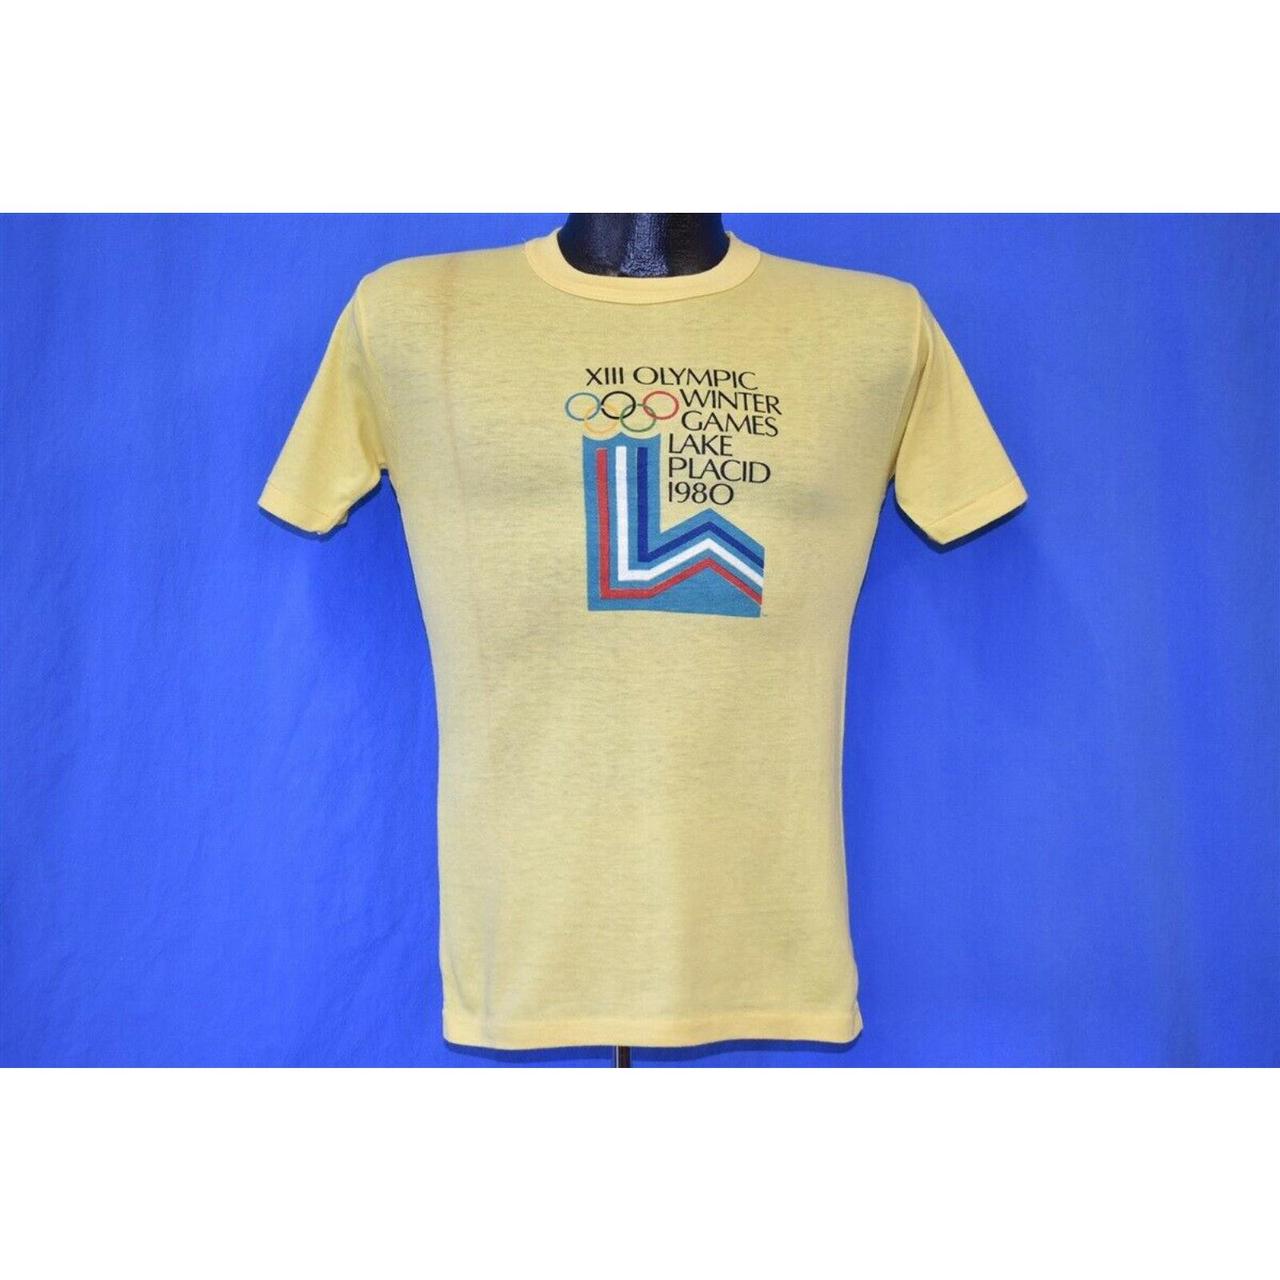 Product Image 2 - vtg 80s OLYMPIC WINTER GAMES